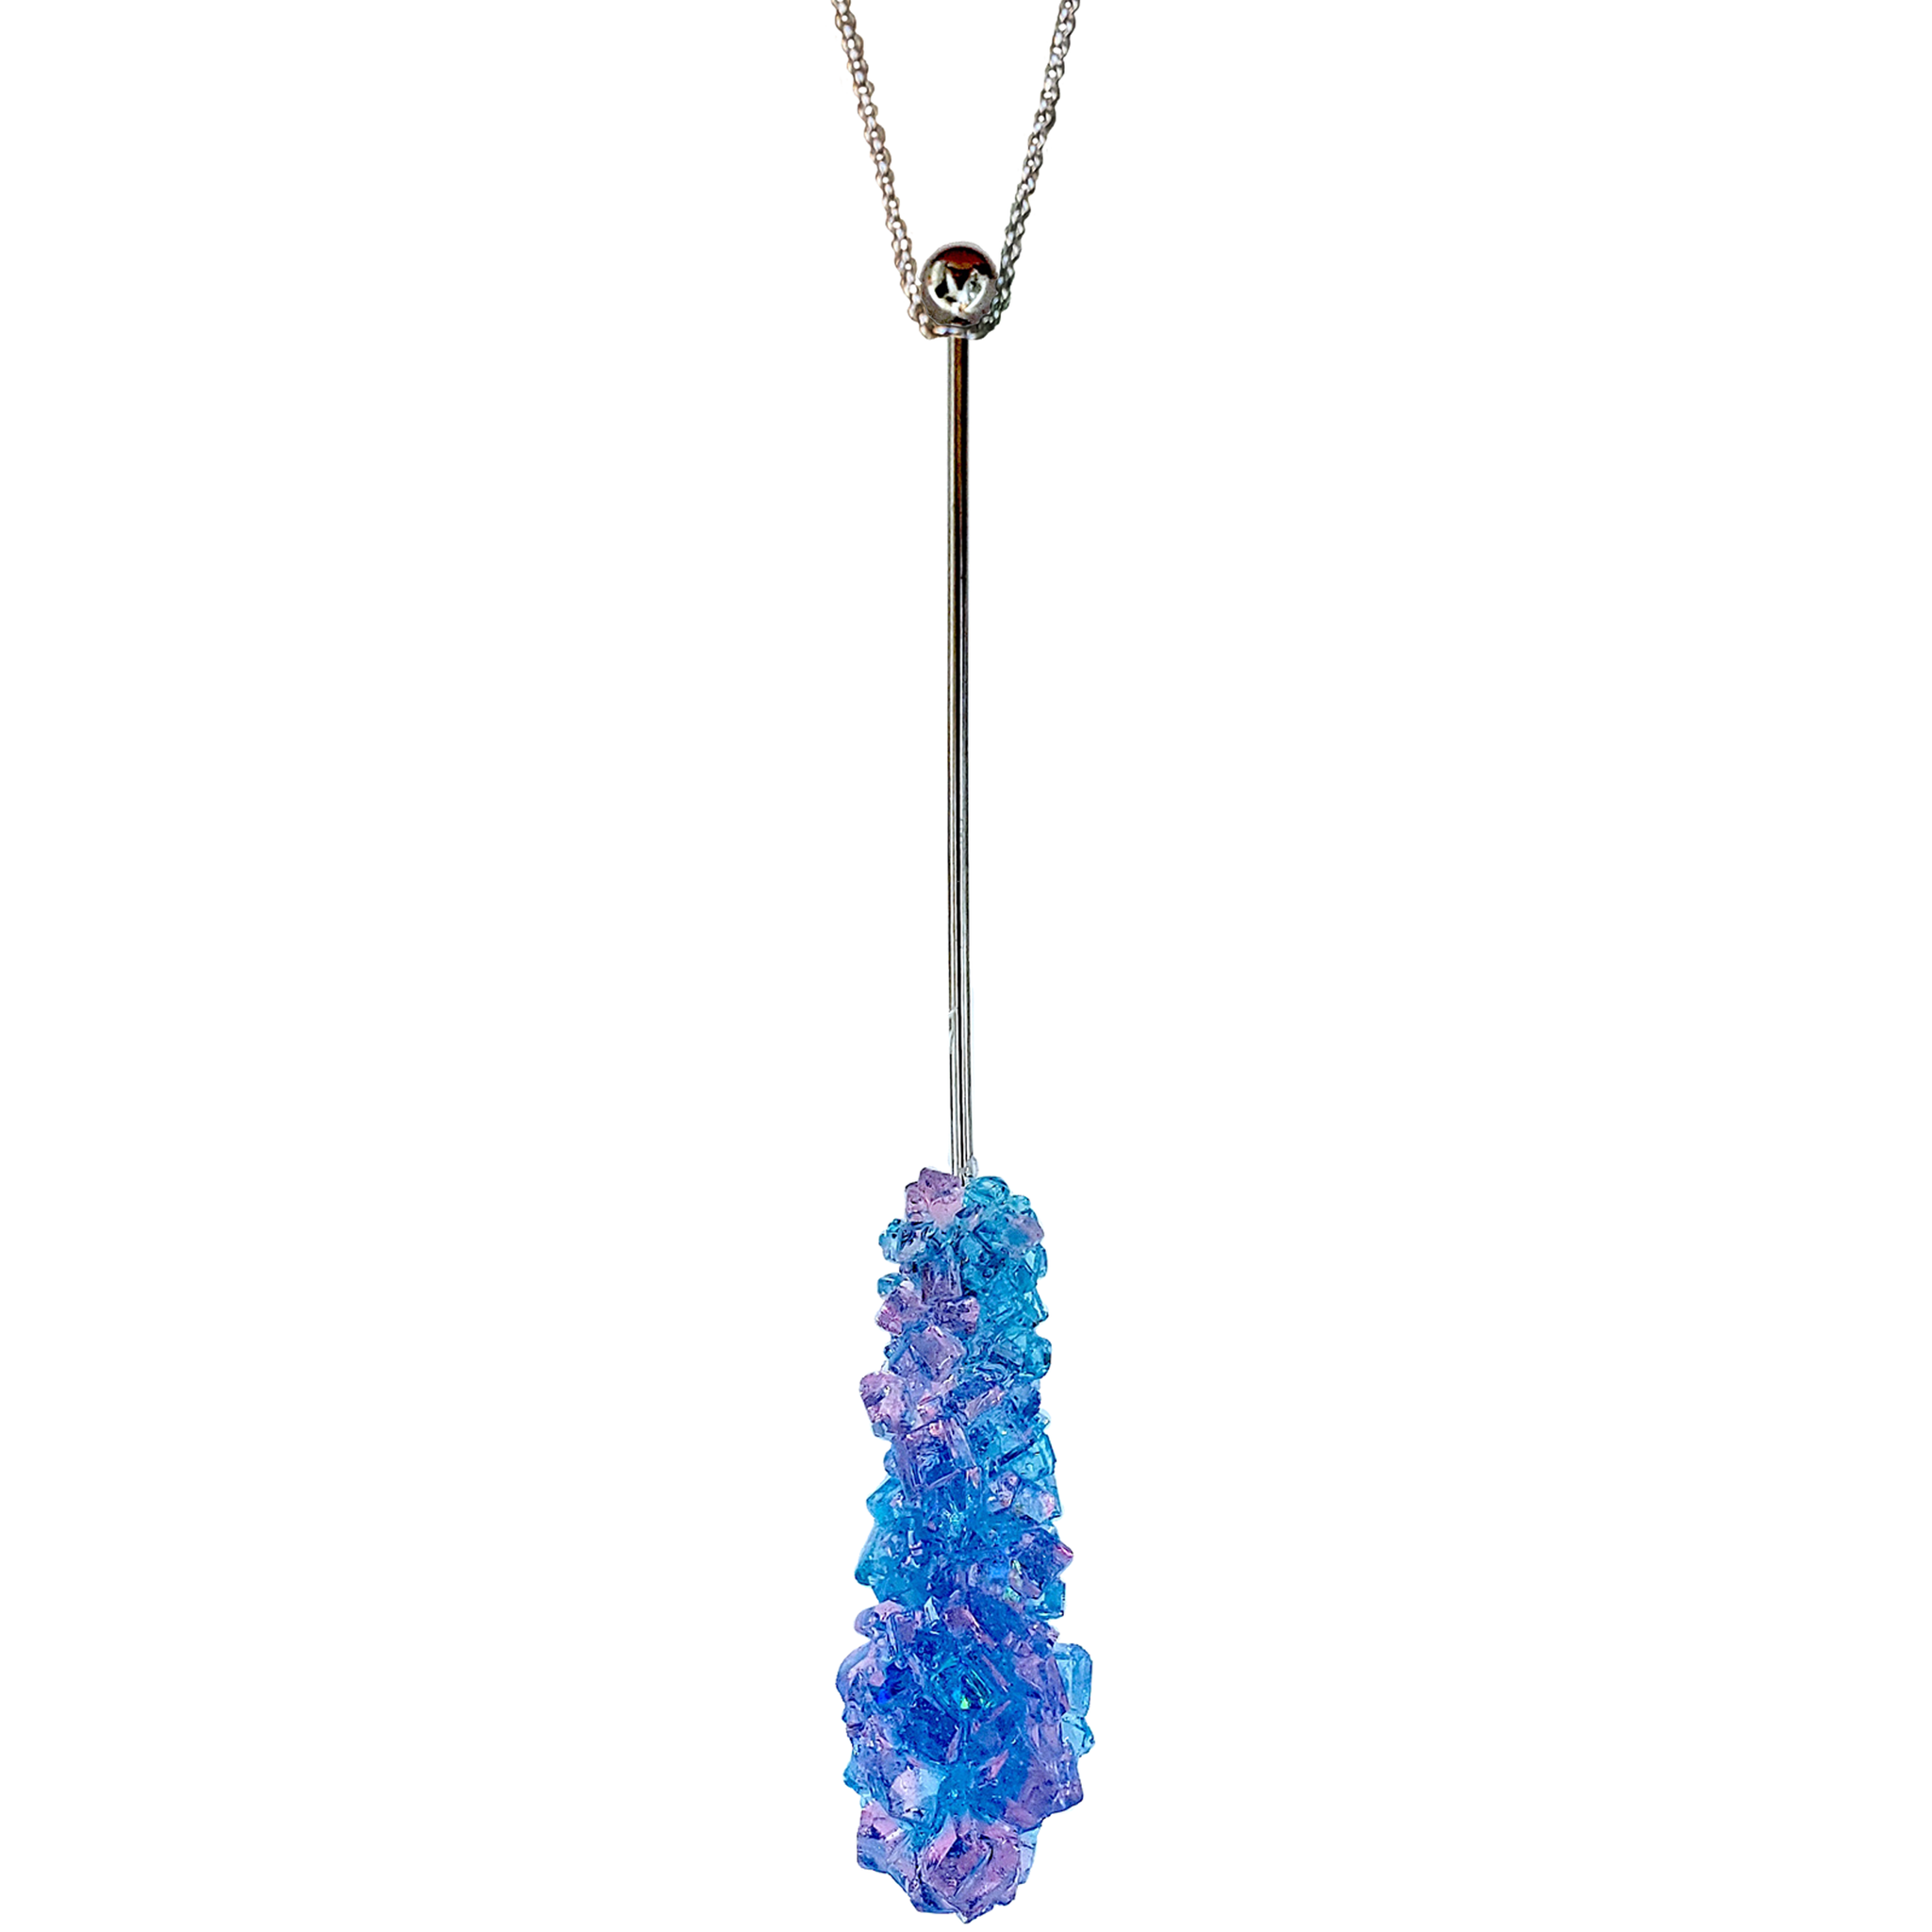 COTTON CANDY ROCK CANDY SWIZZLE STICK NECKLACE